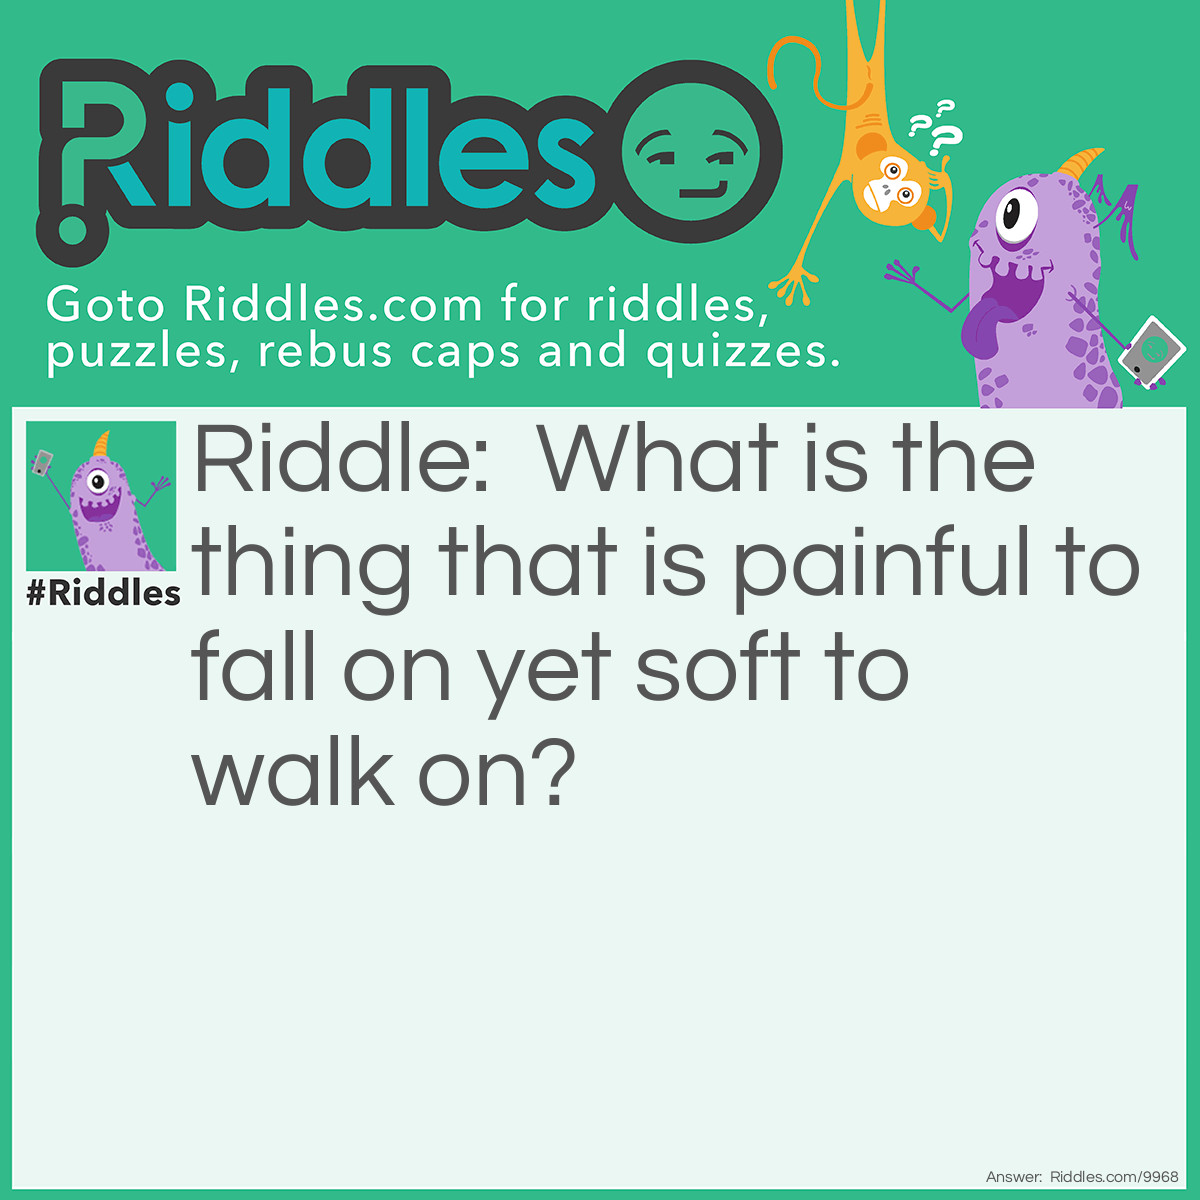 Riddle: What is the thing that is painful to fall on yet soft to walk on? Answer: A carpet.